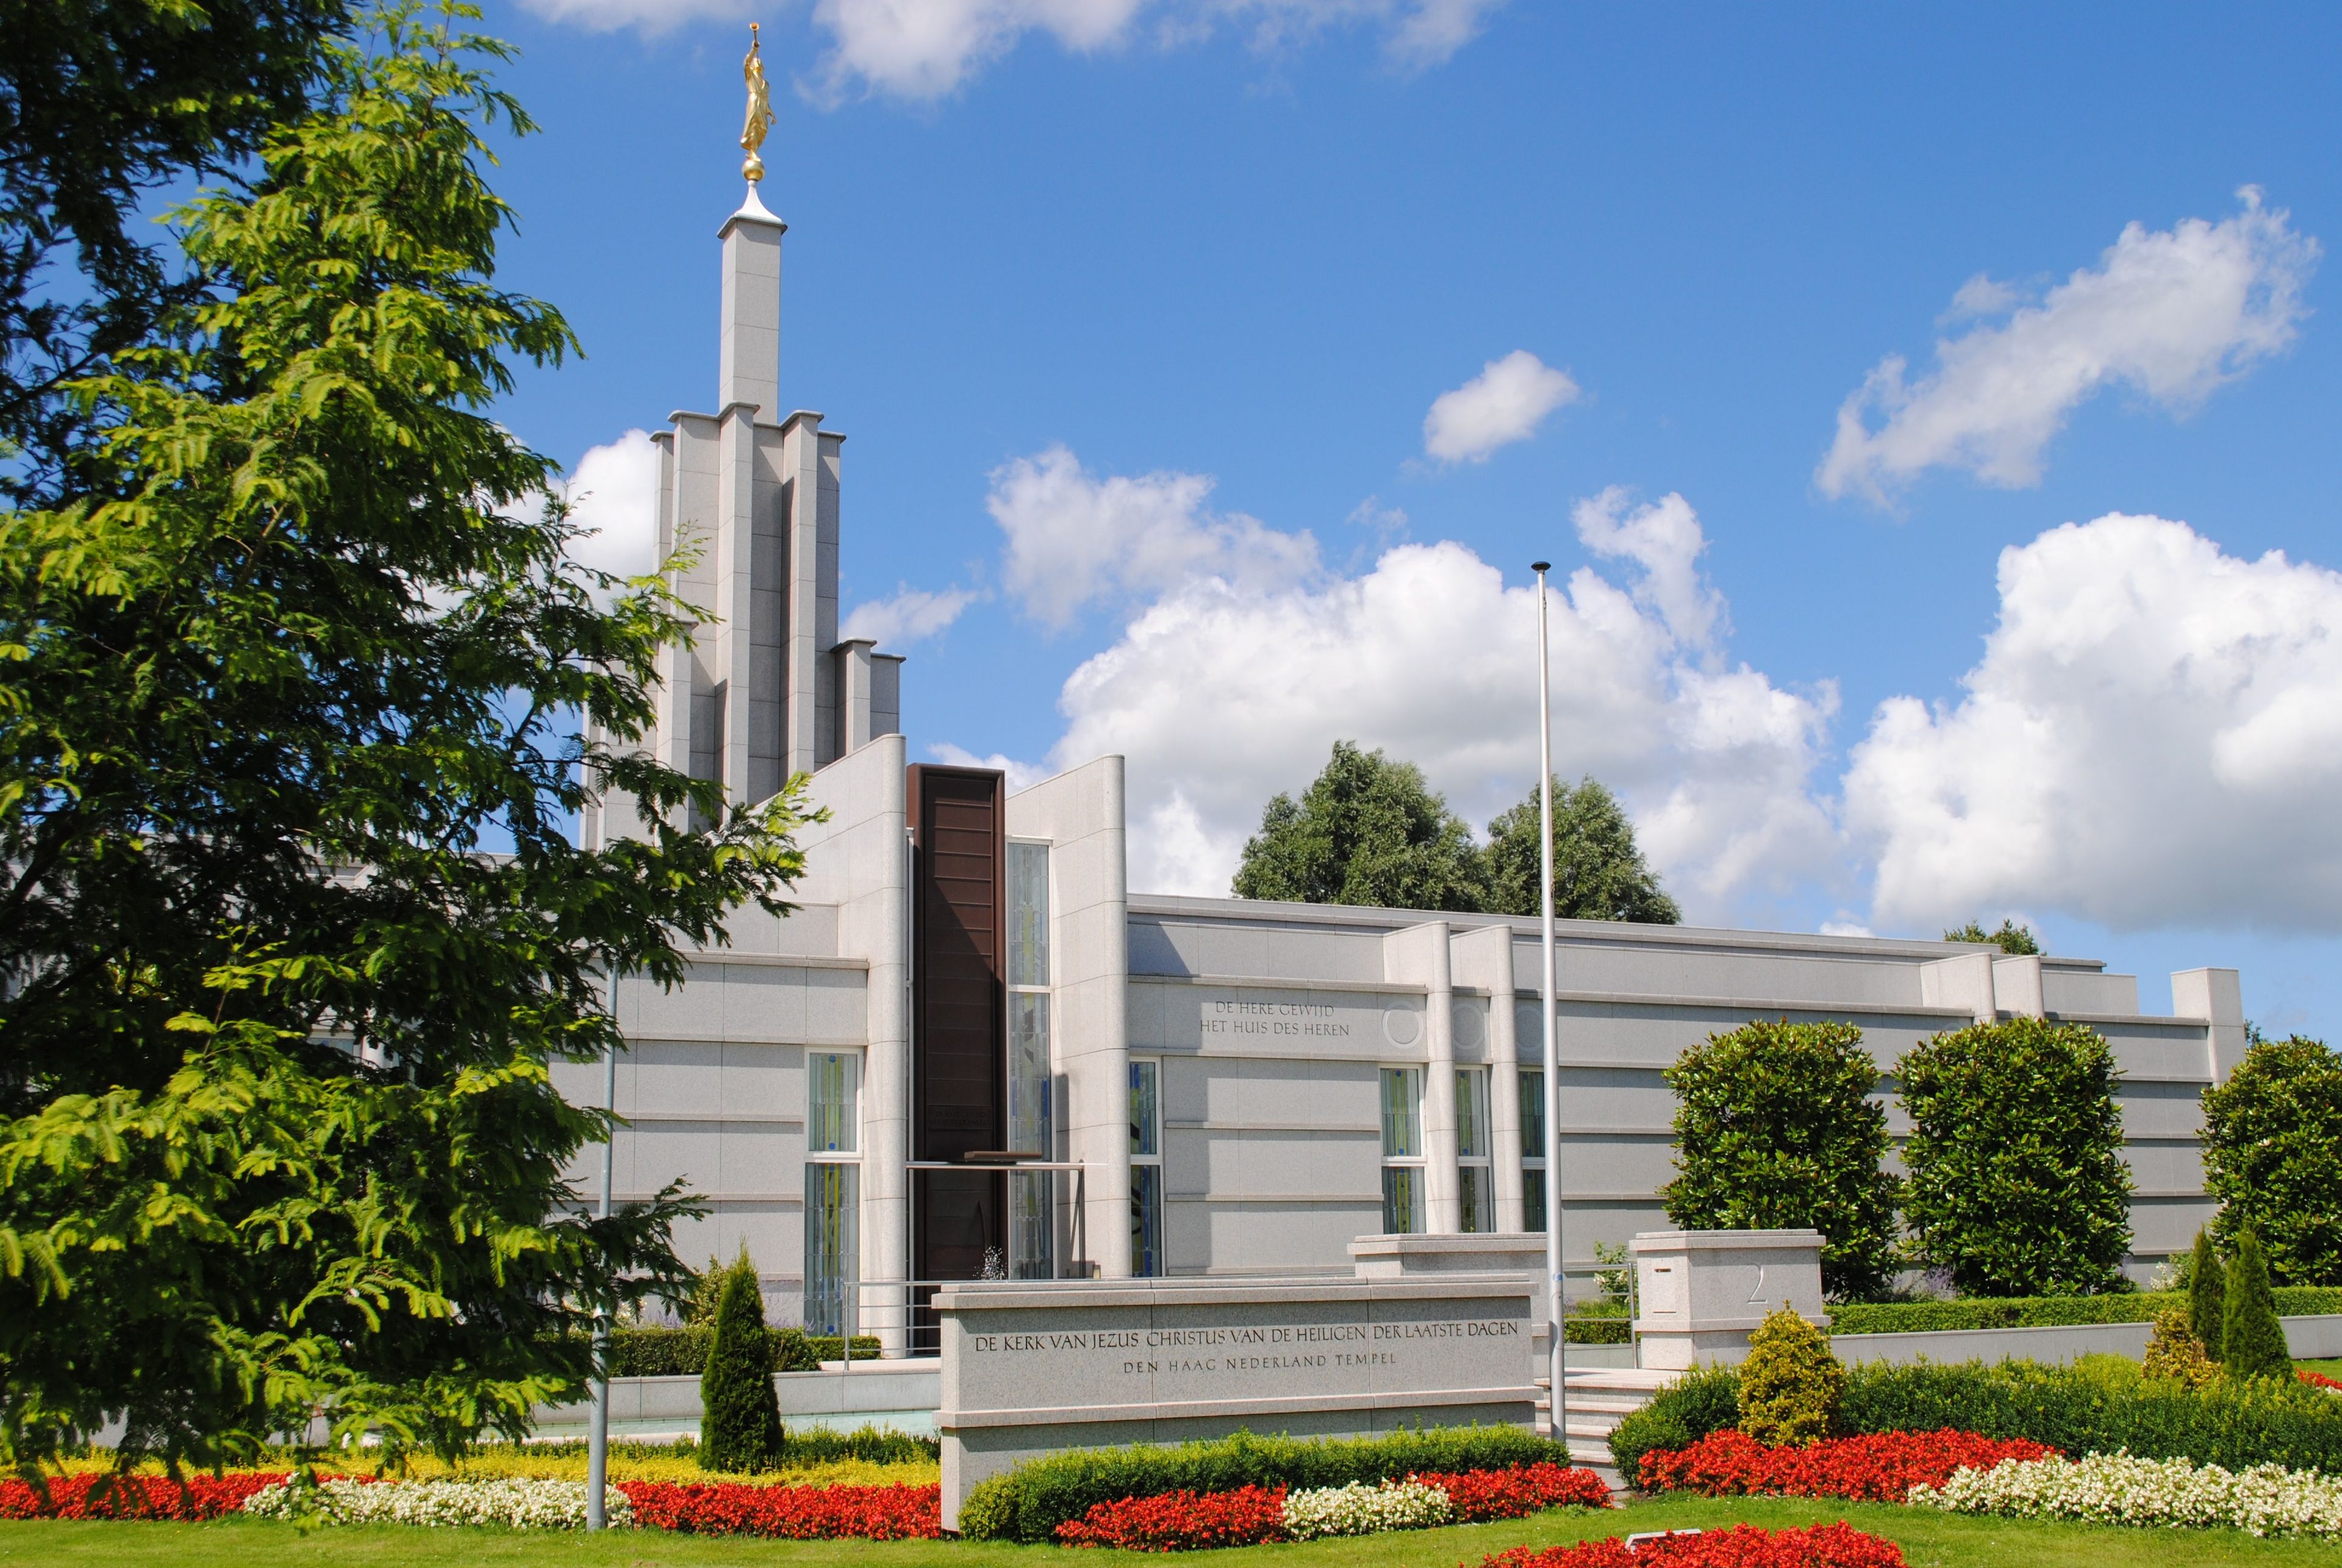 The Hague Netherlands Temple, with the name sign, scenery, and entrance.